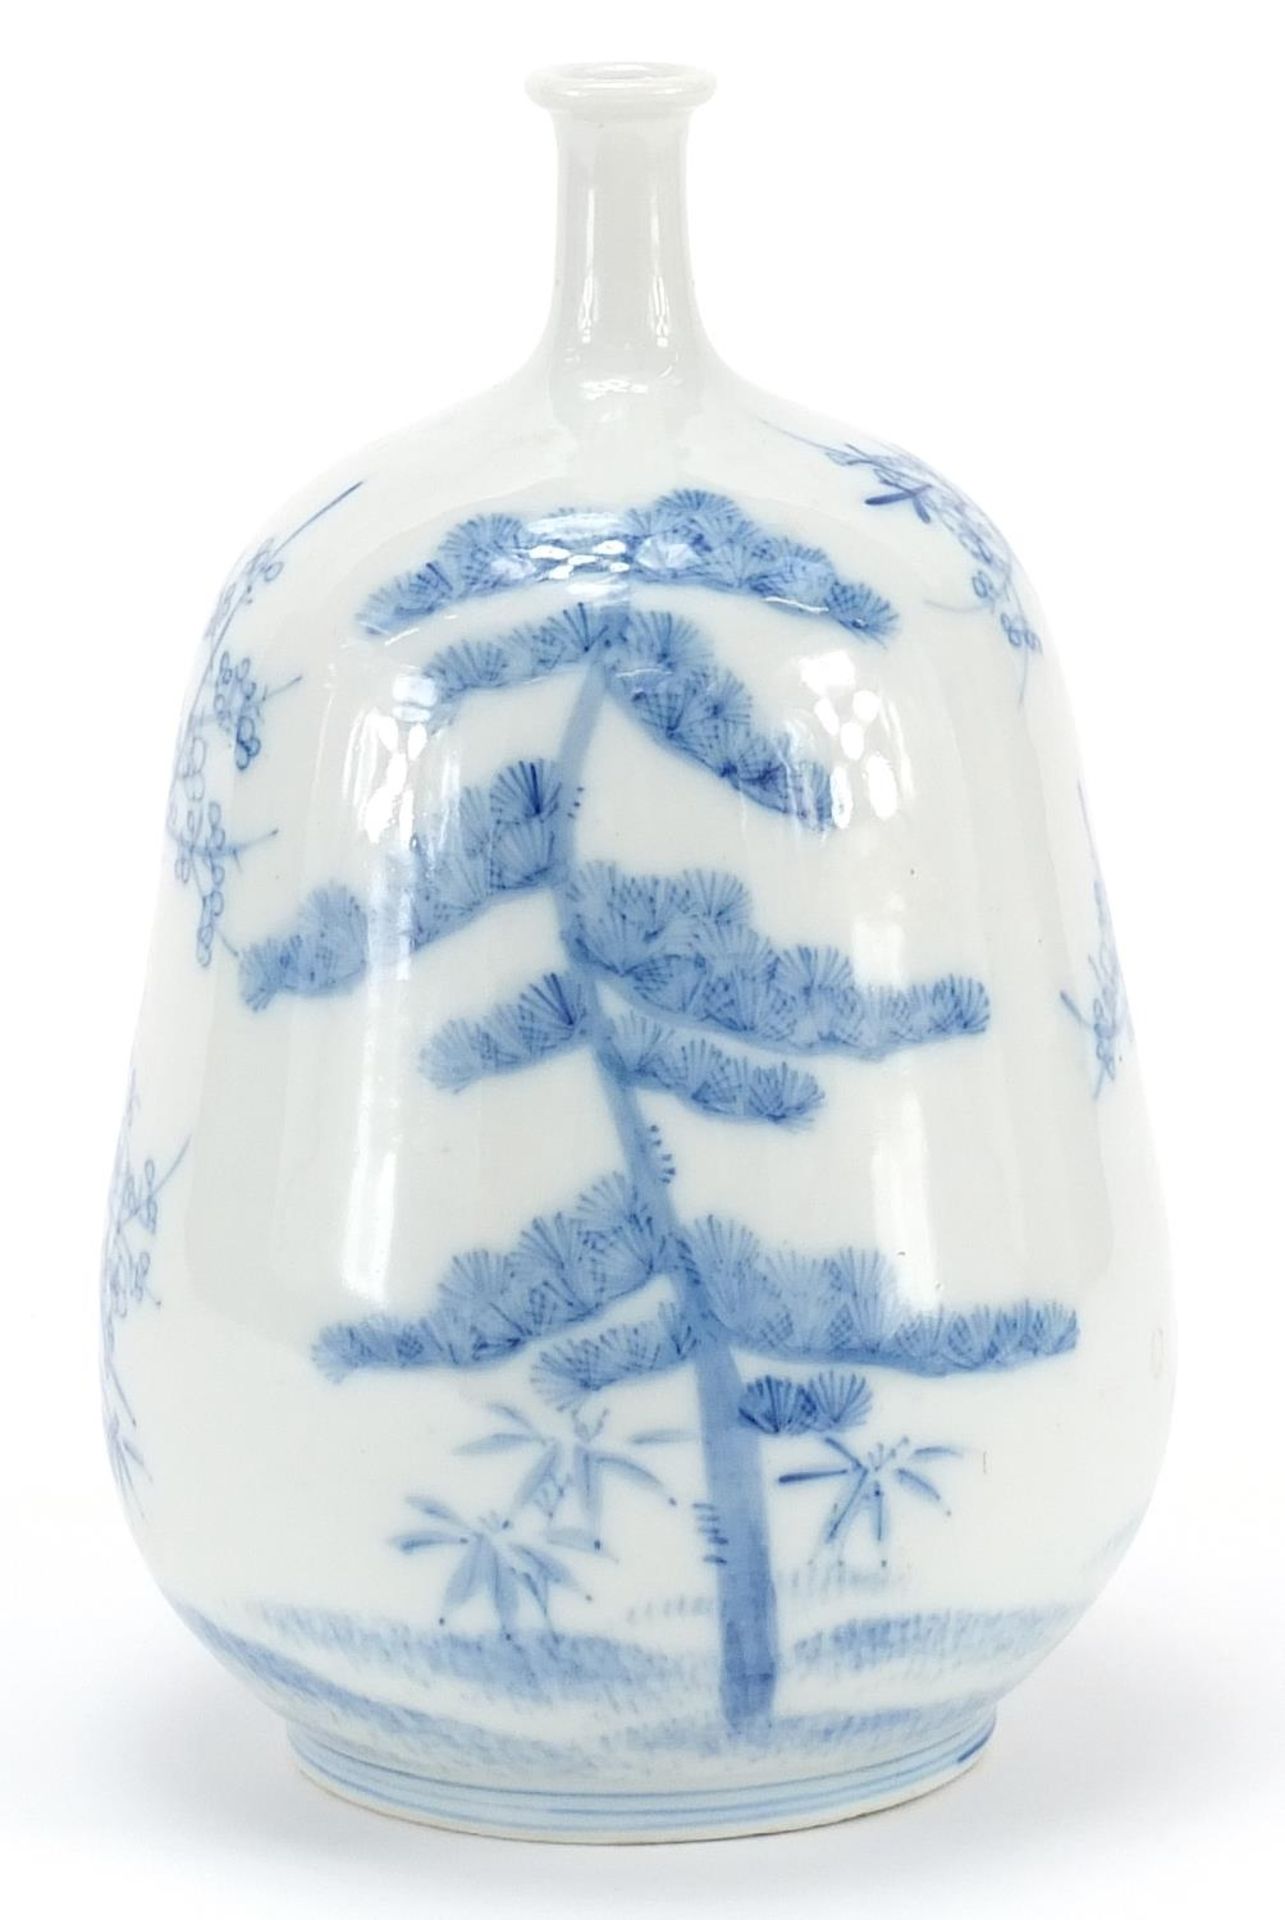 Japanese blue and white porcelain vase hand painted with trees, 23.5cm high - Image 2 of 3